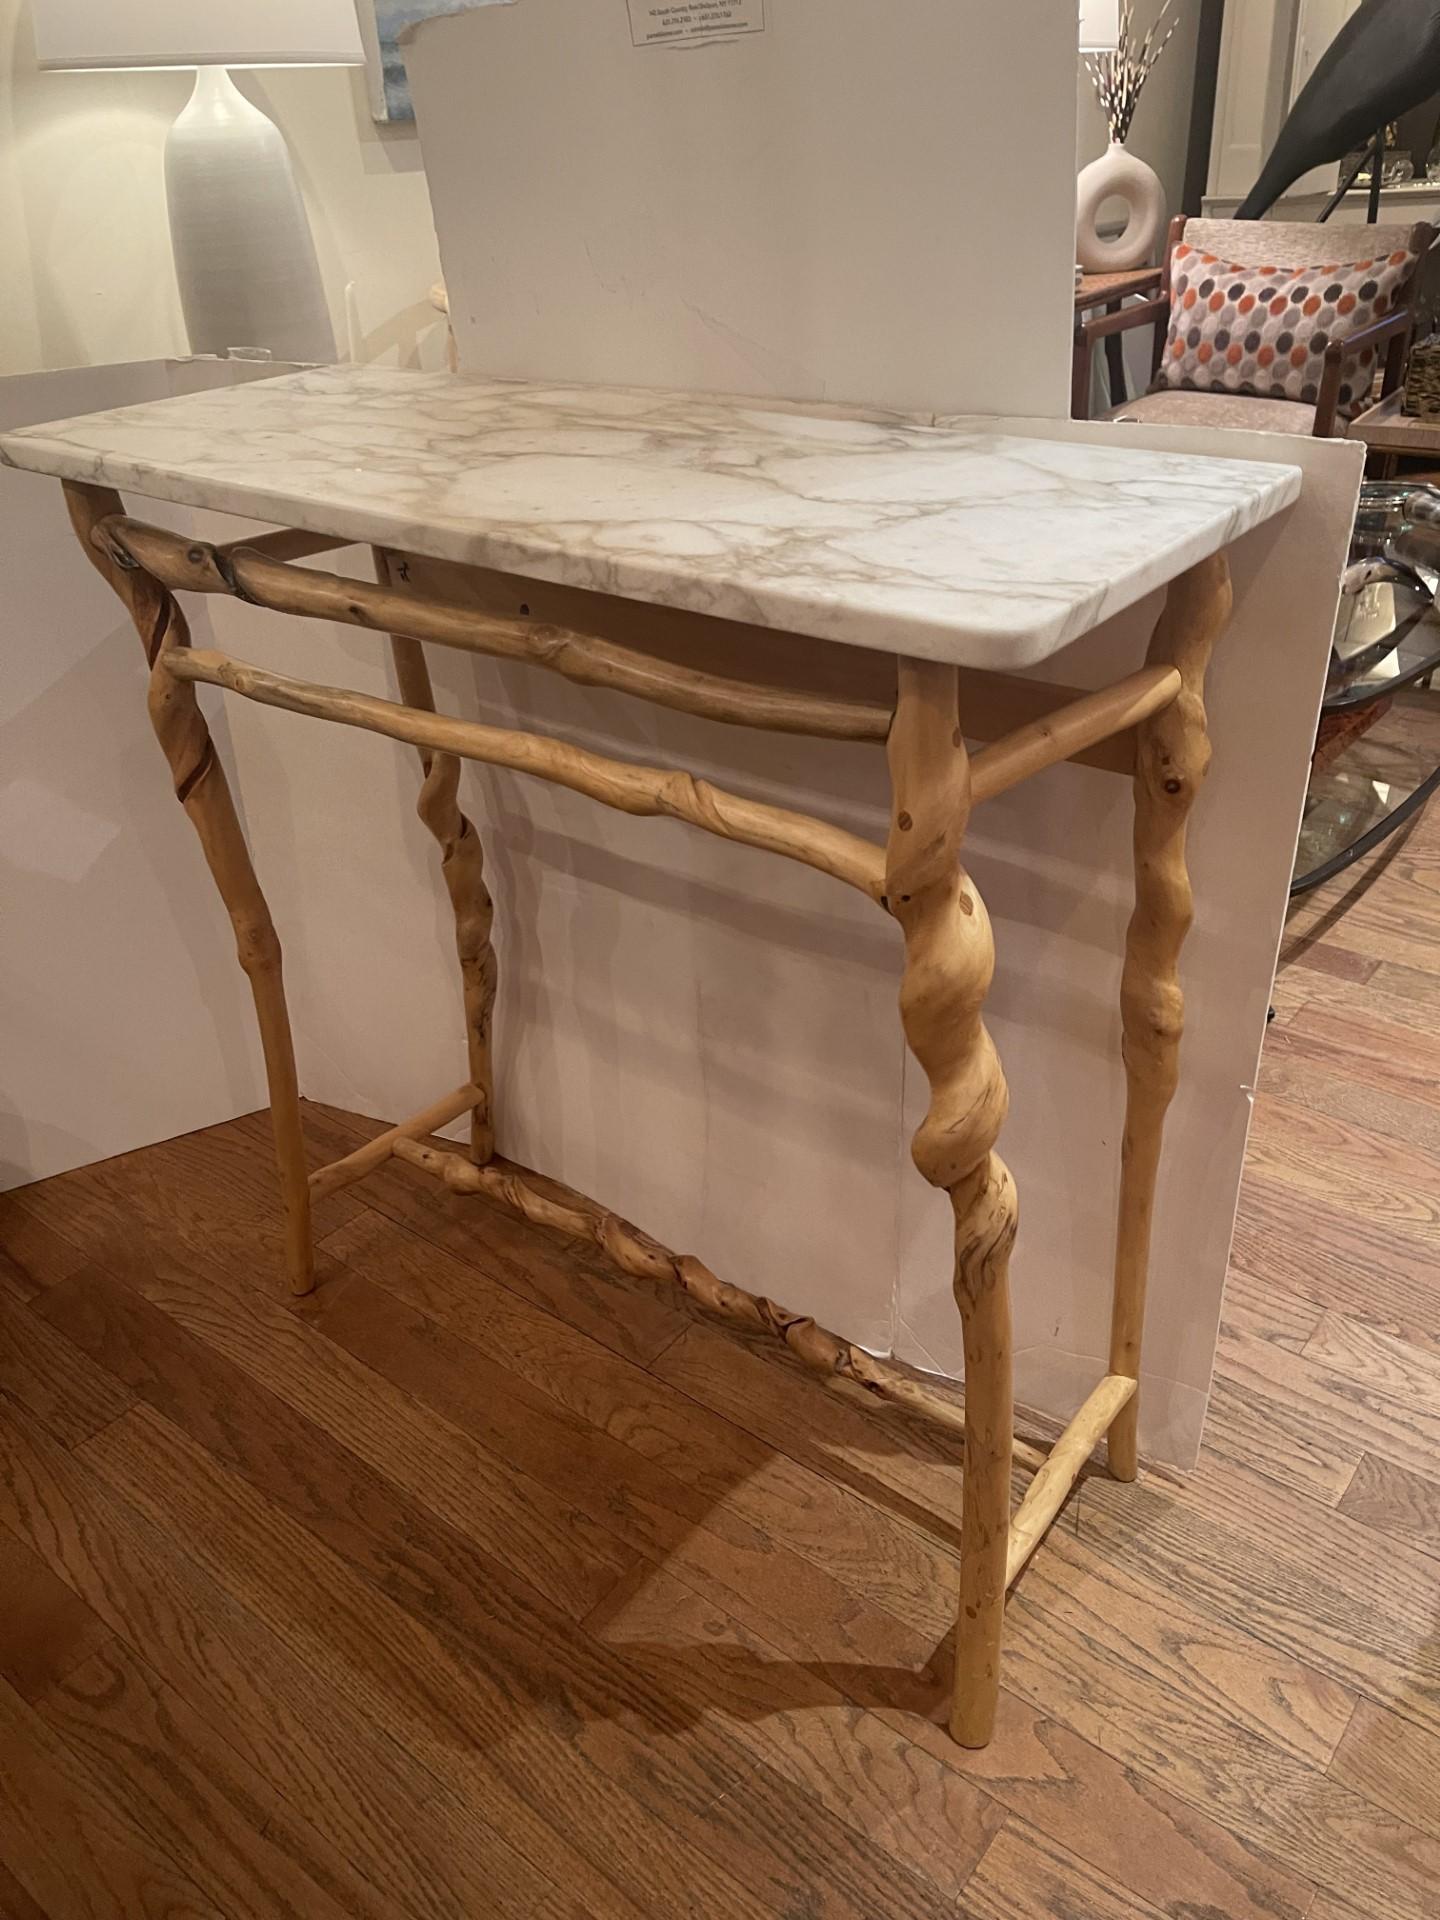 Studio crafted works by David Ebner. To date there were only two  works ever crafted  with marble tops in the sassafras wood group, making this console an extremely rare find. Immaculate condition and masterful craftsmanship. Click through the